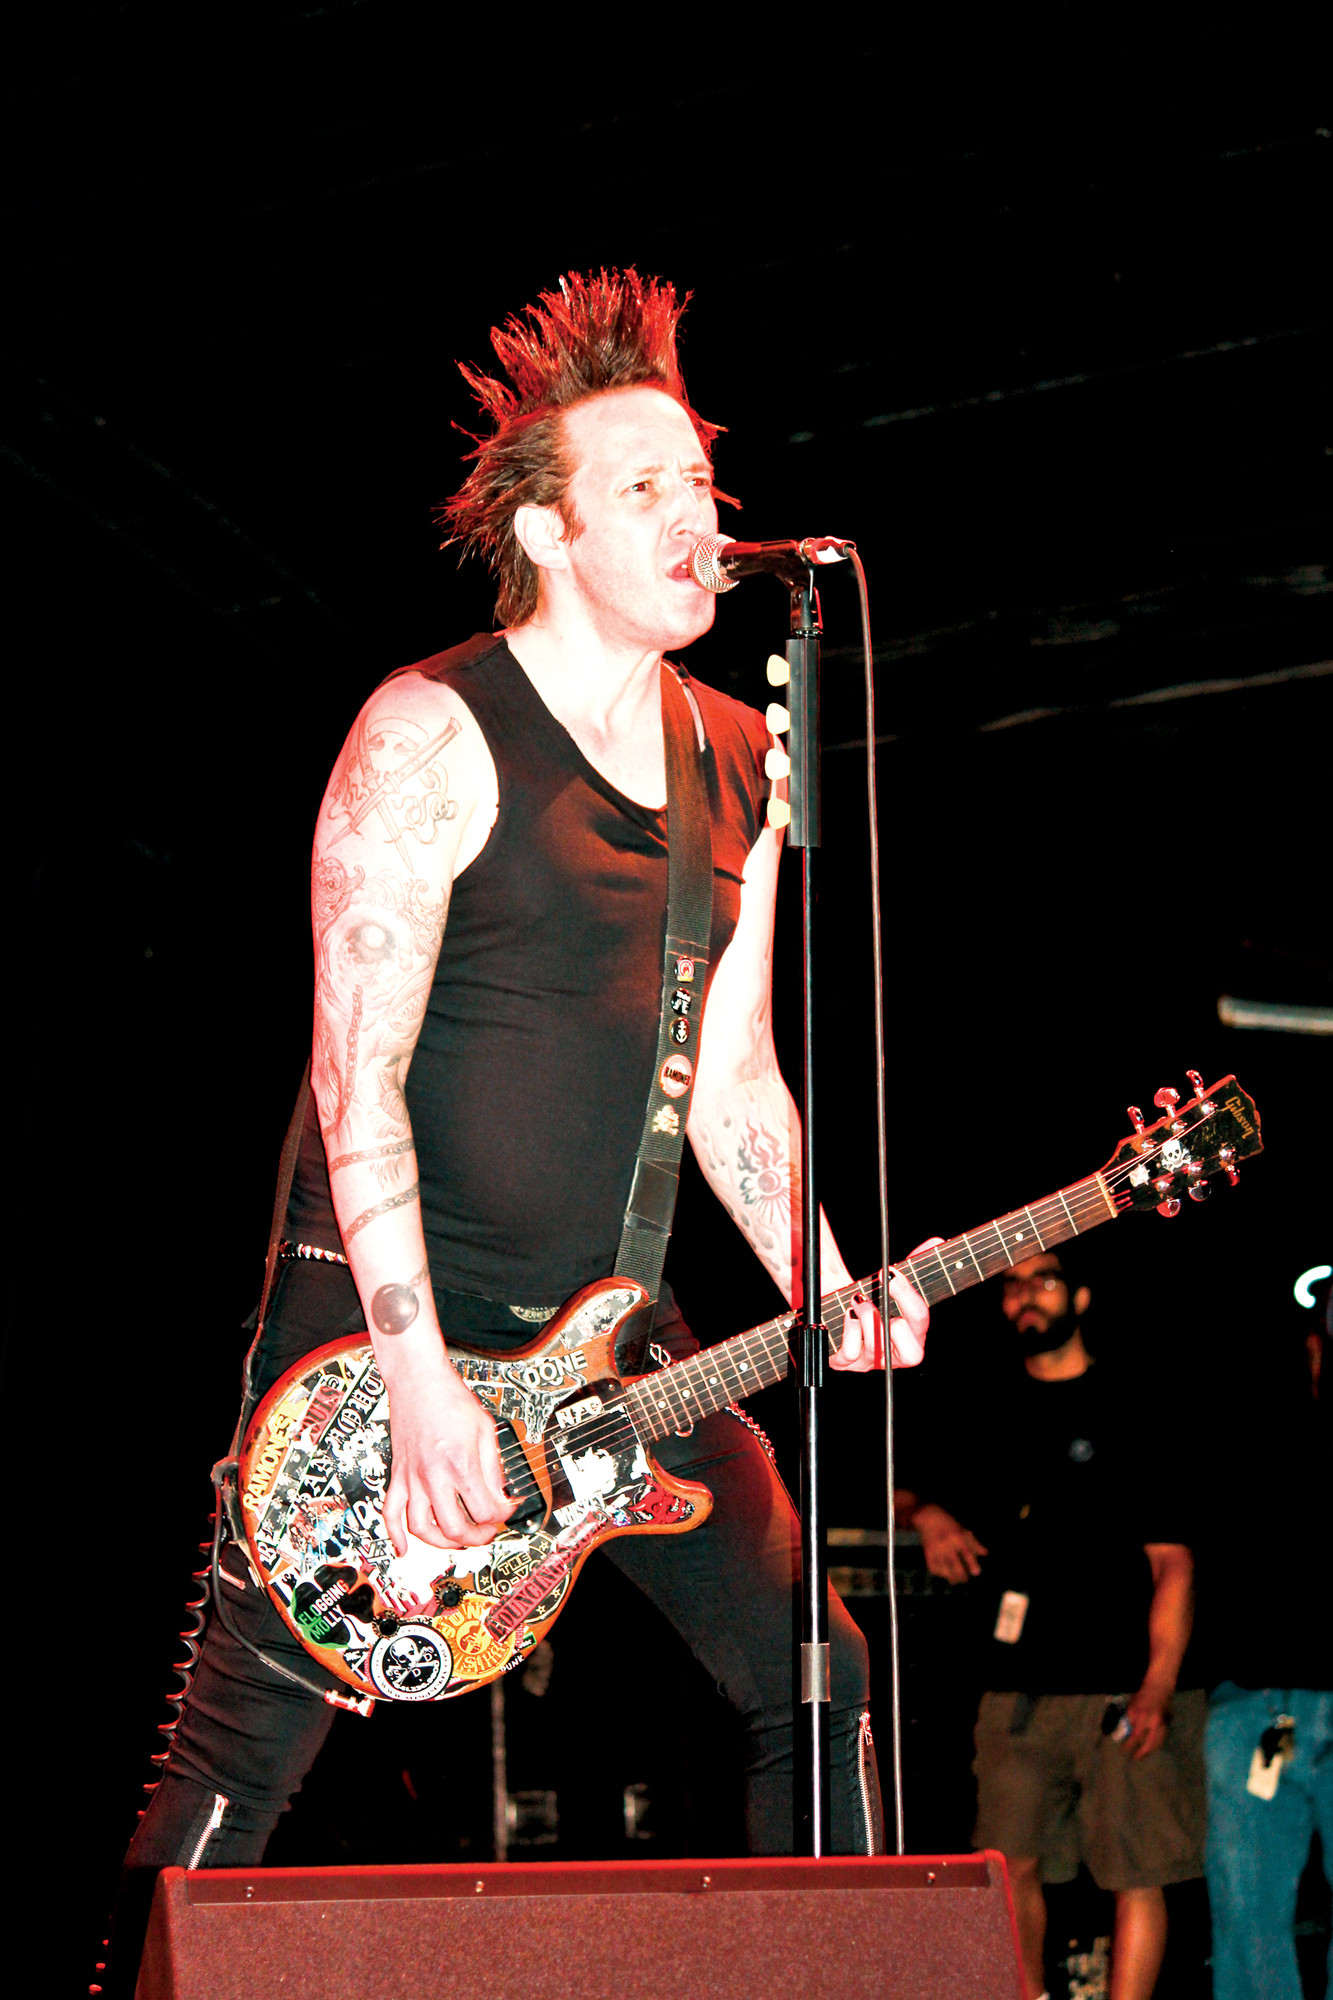 Dougie Needles was the lead guitarist for Blackhearts.